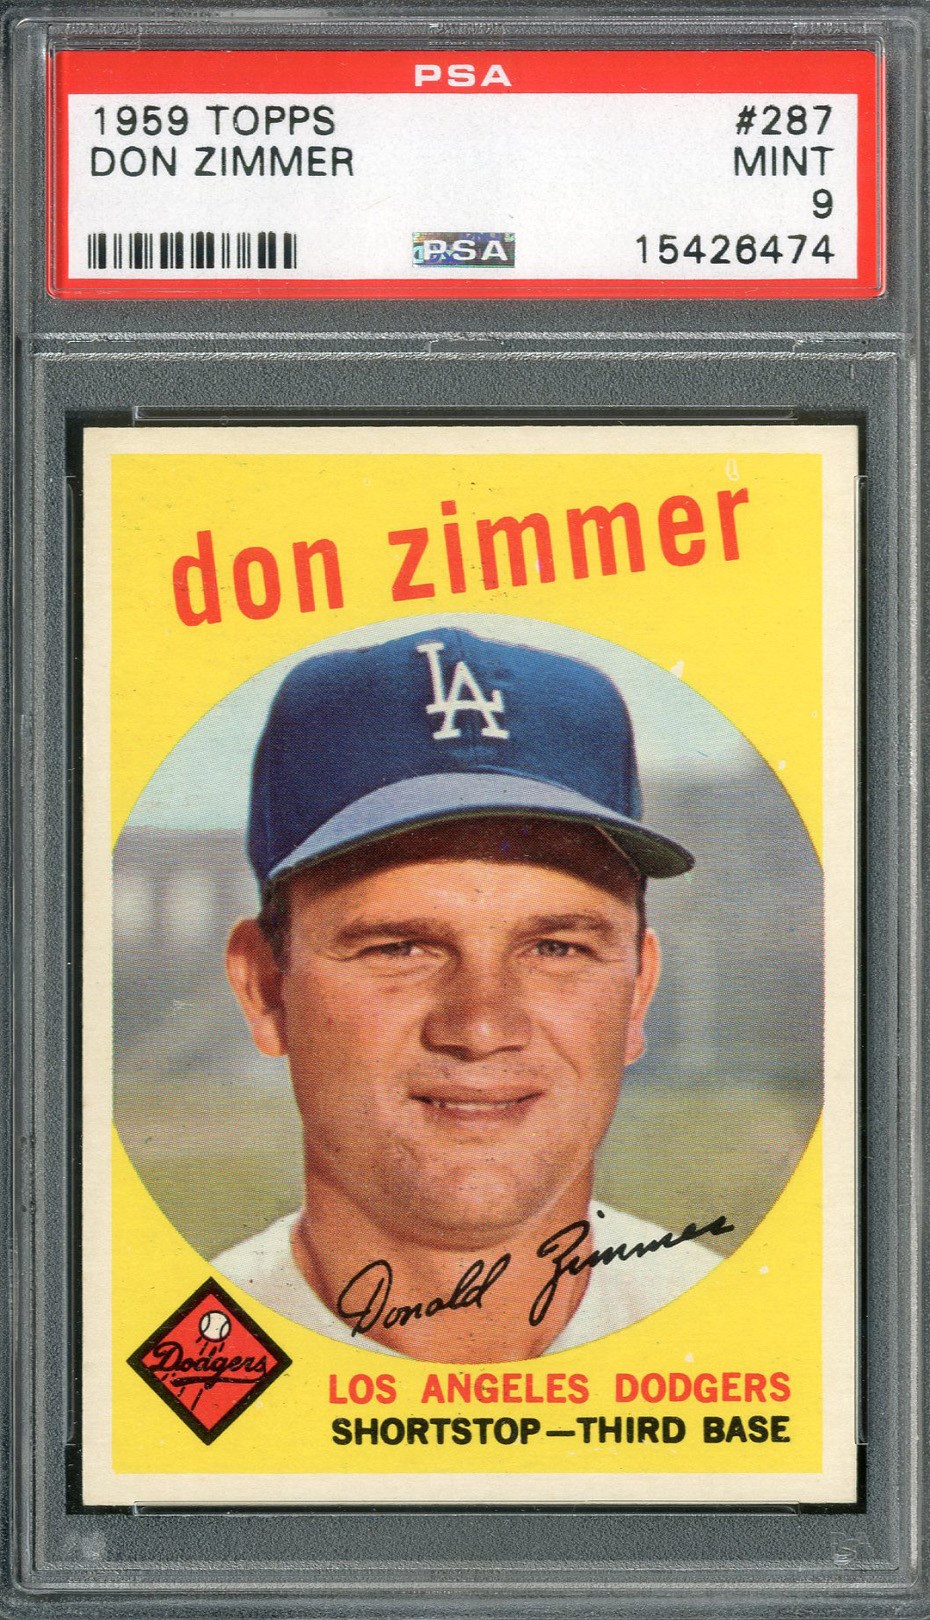 Baseball and Trading Cards - 1959 Topps #287 Don Zimmer PSA MINT 9